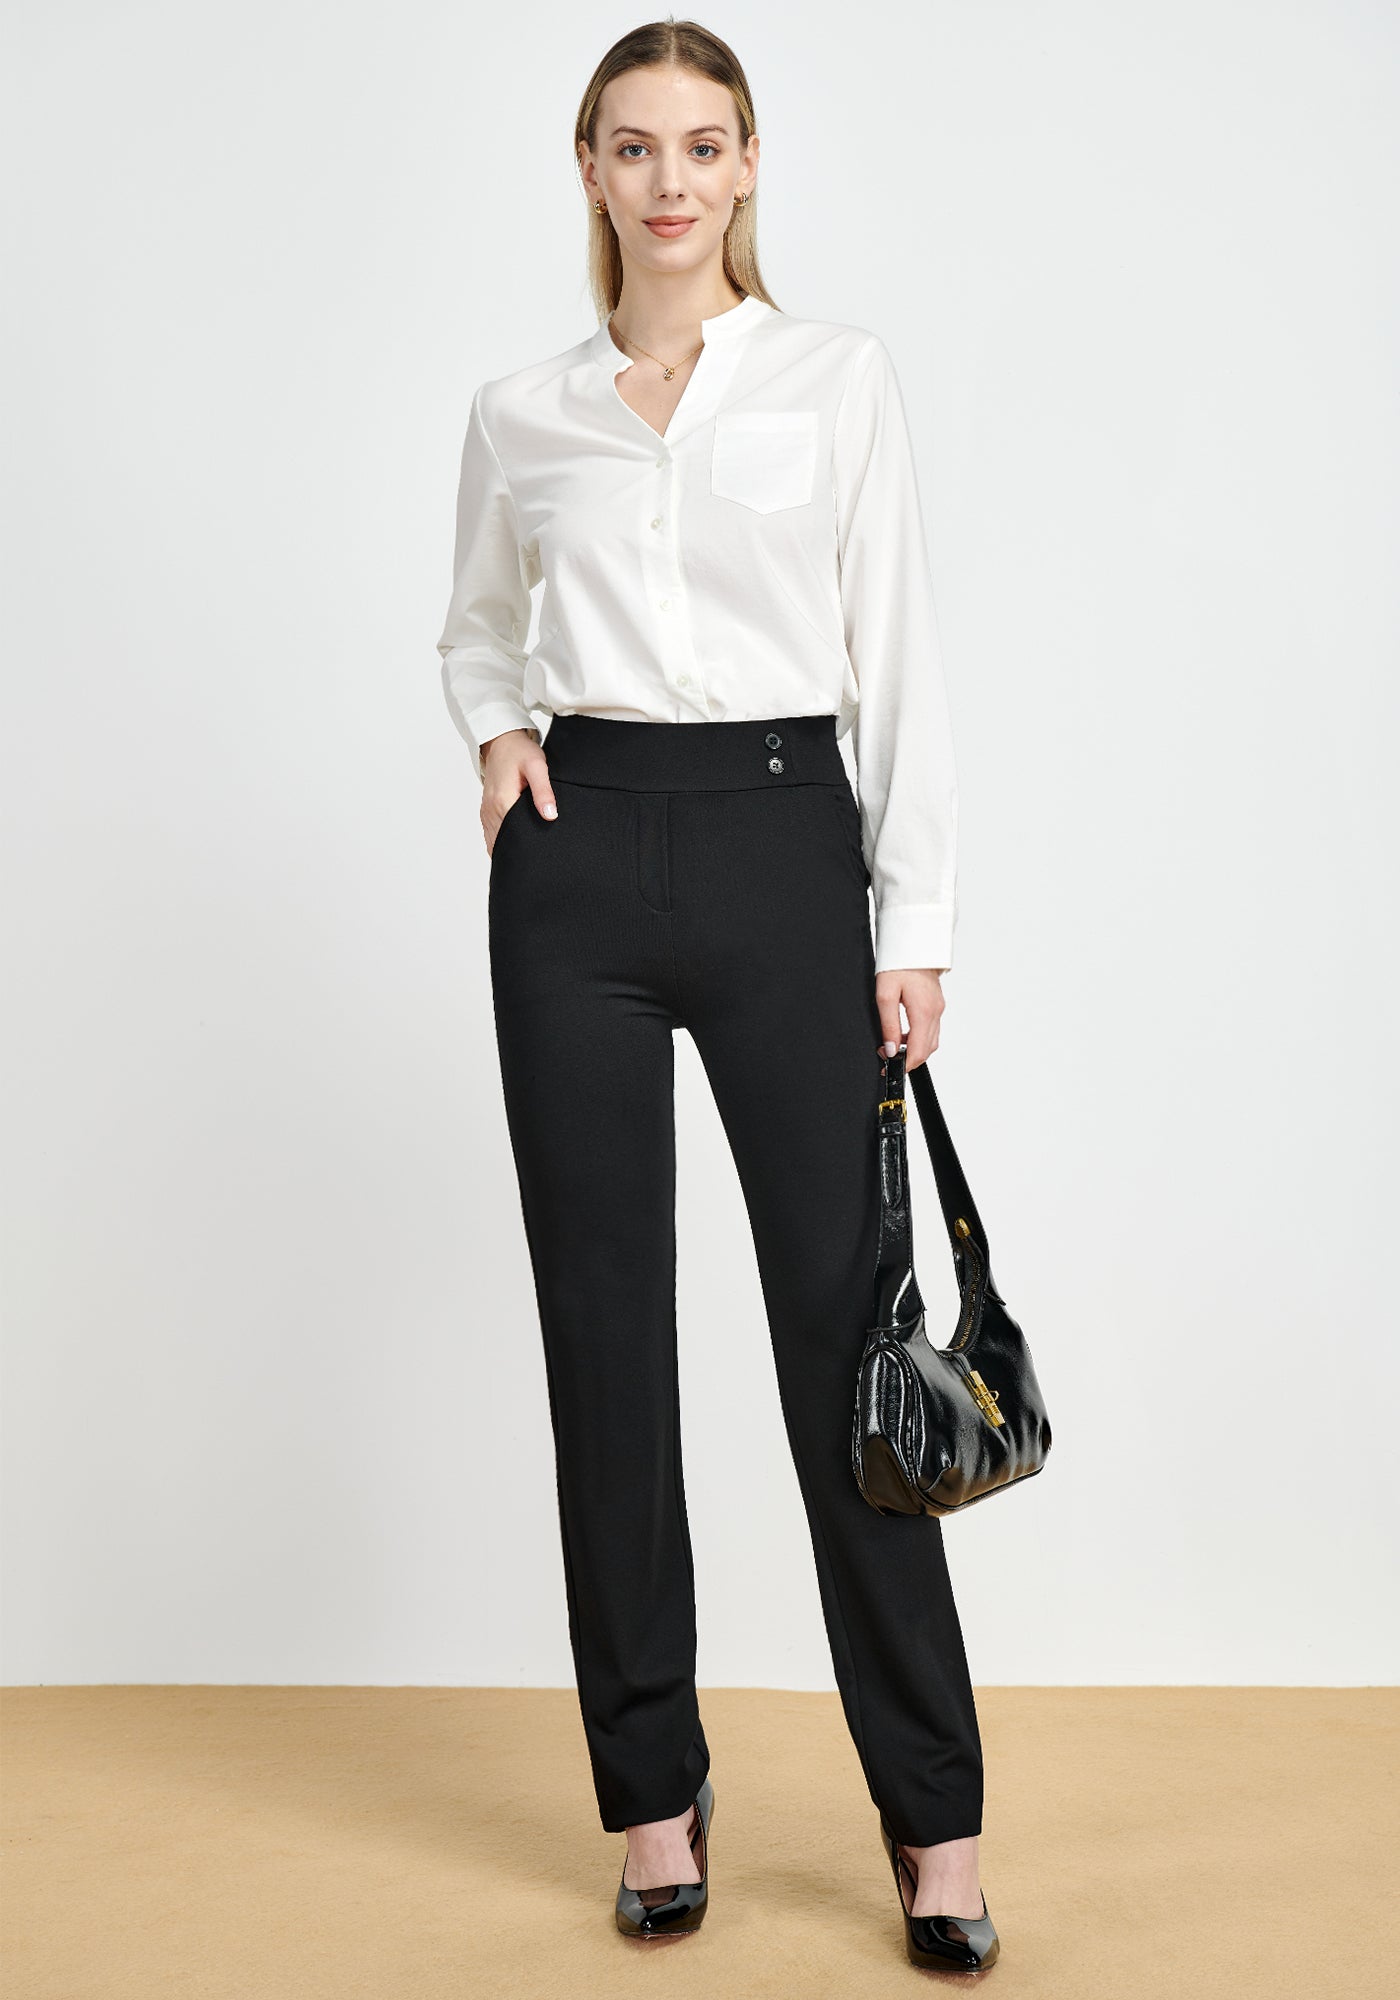 Try On Haul- Tapata Dress Pants- Summer Dresses, Tops and